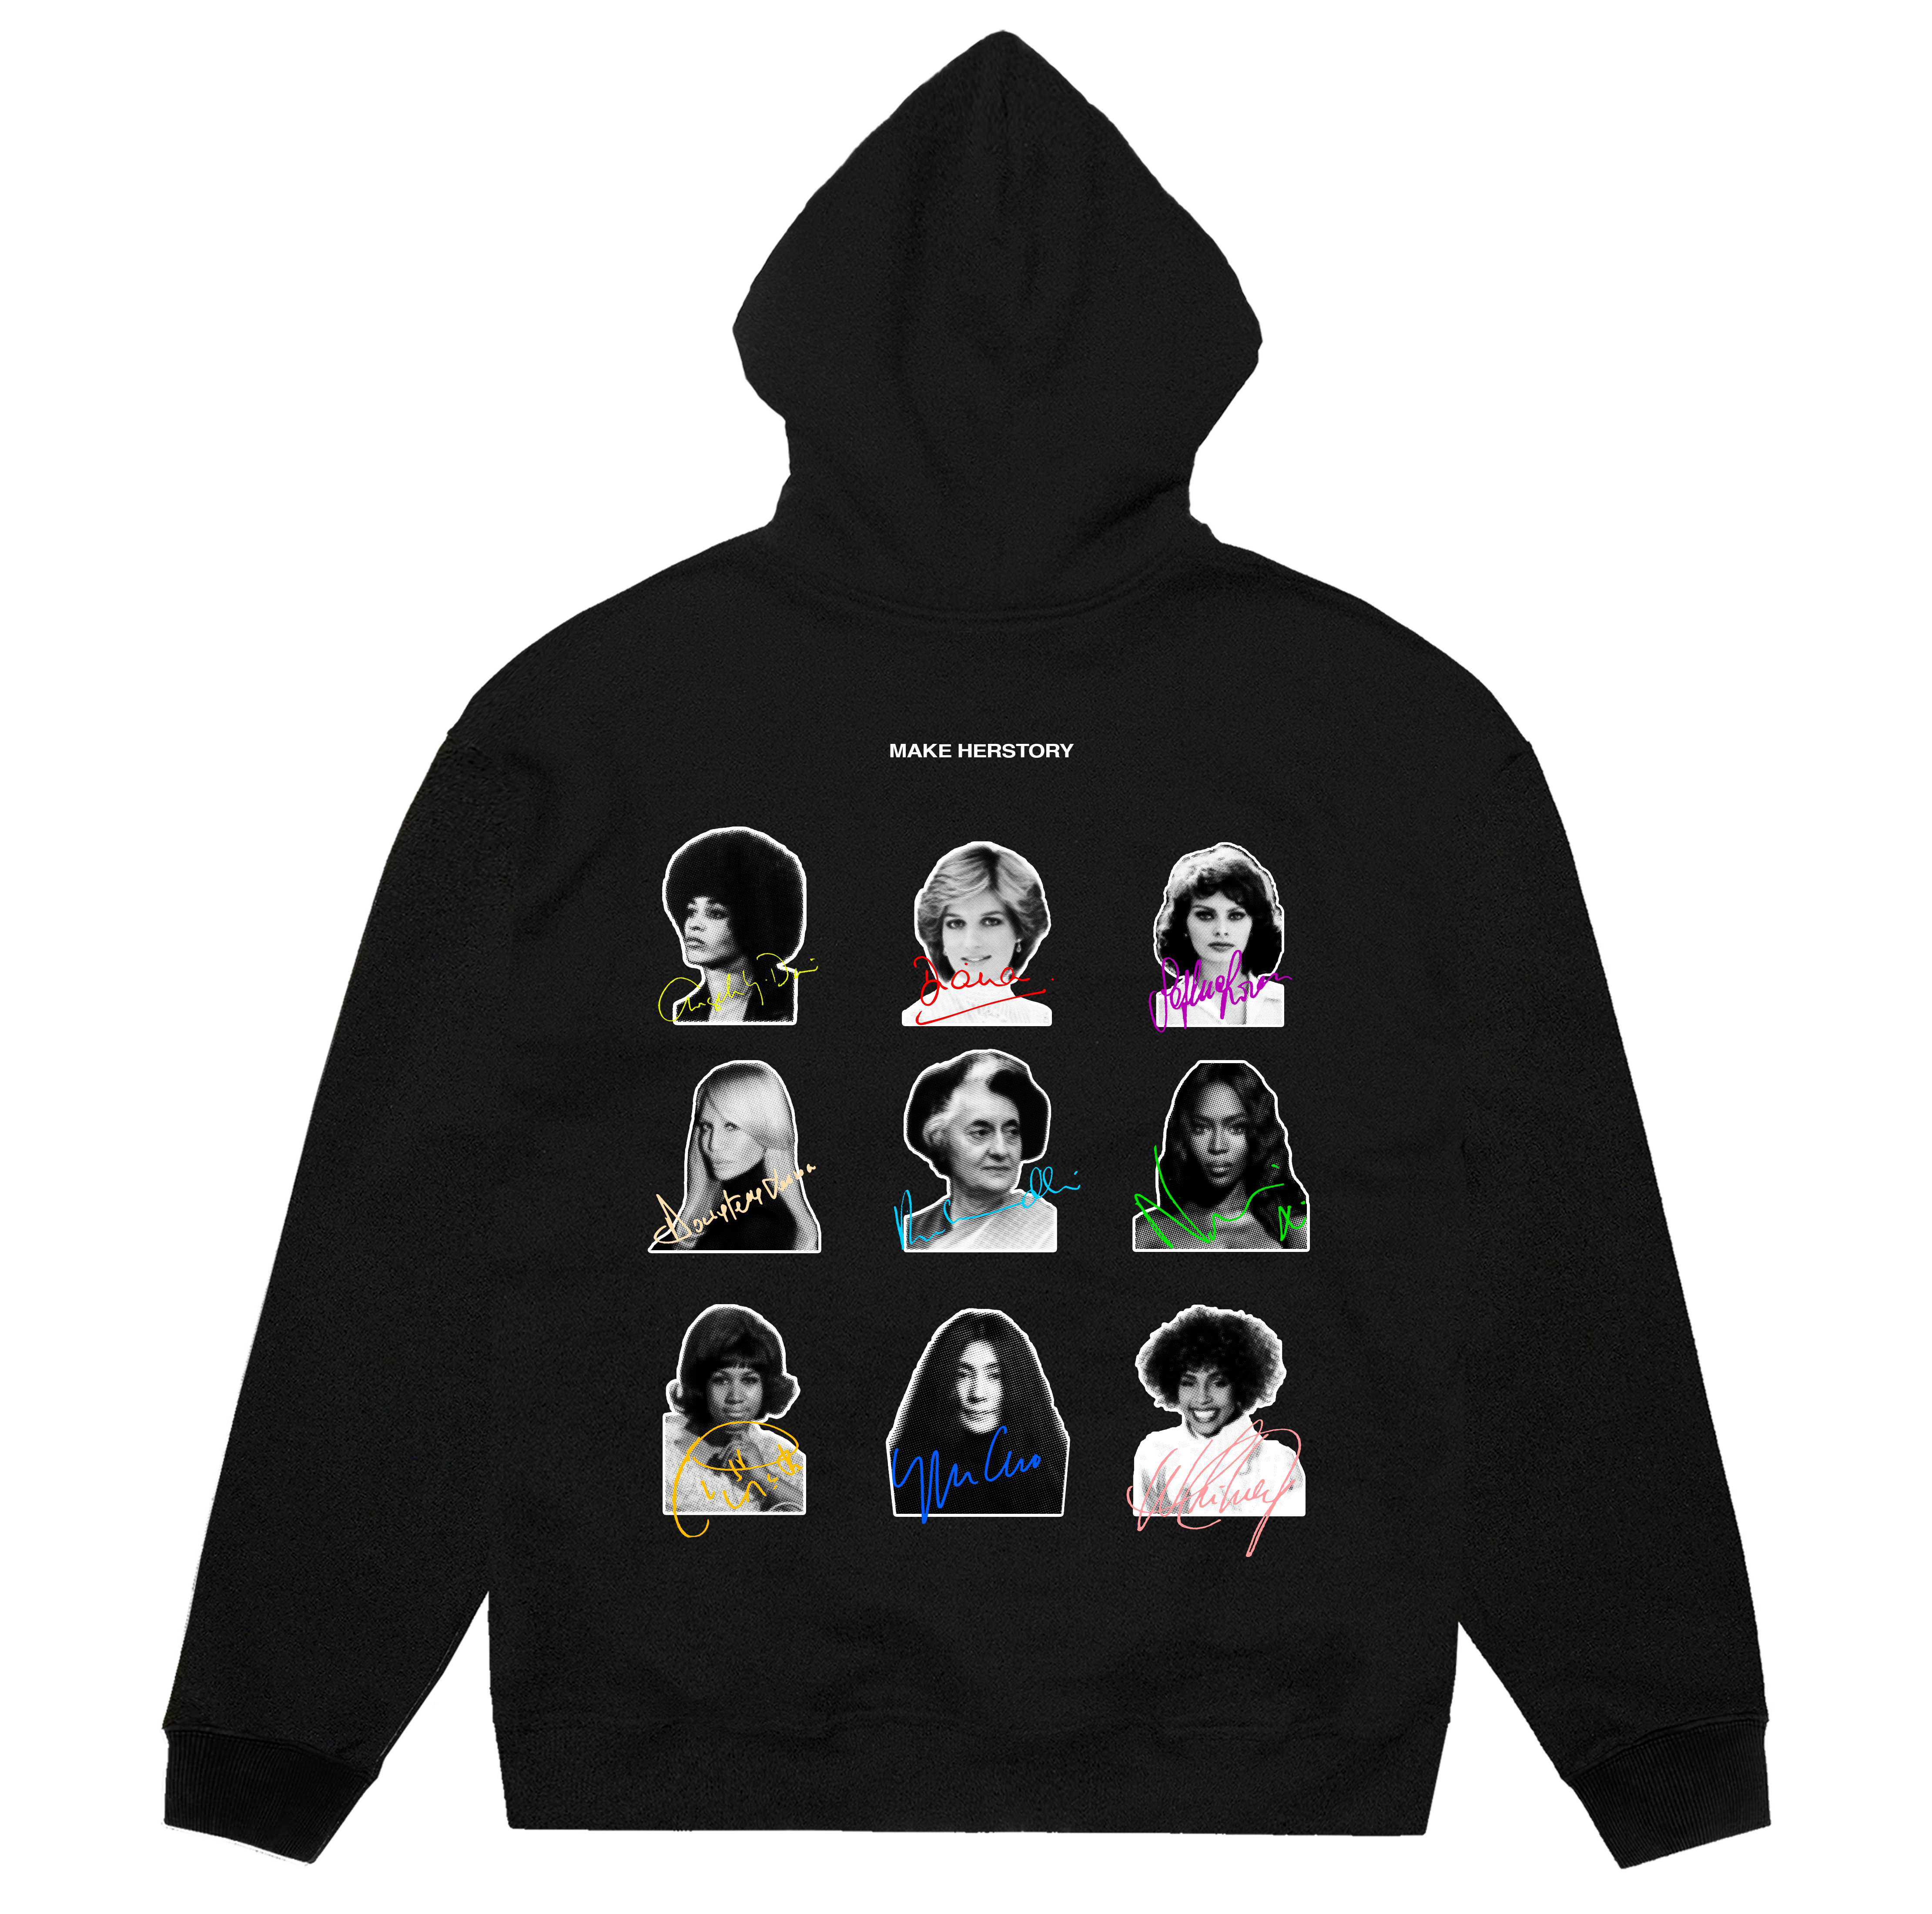 (LIMITED) Behind Every Great Human There's A Great Woman Black Hoodie - capsulegodsshop